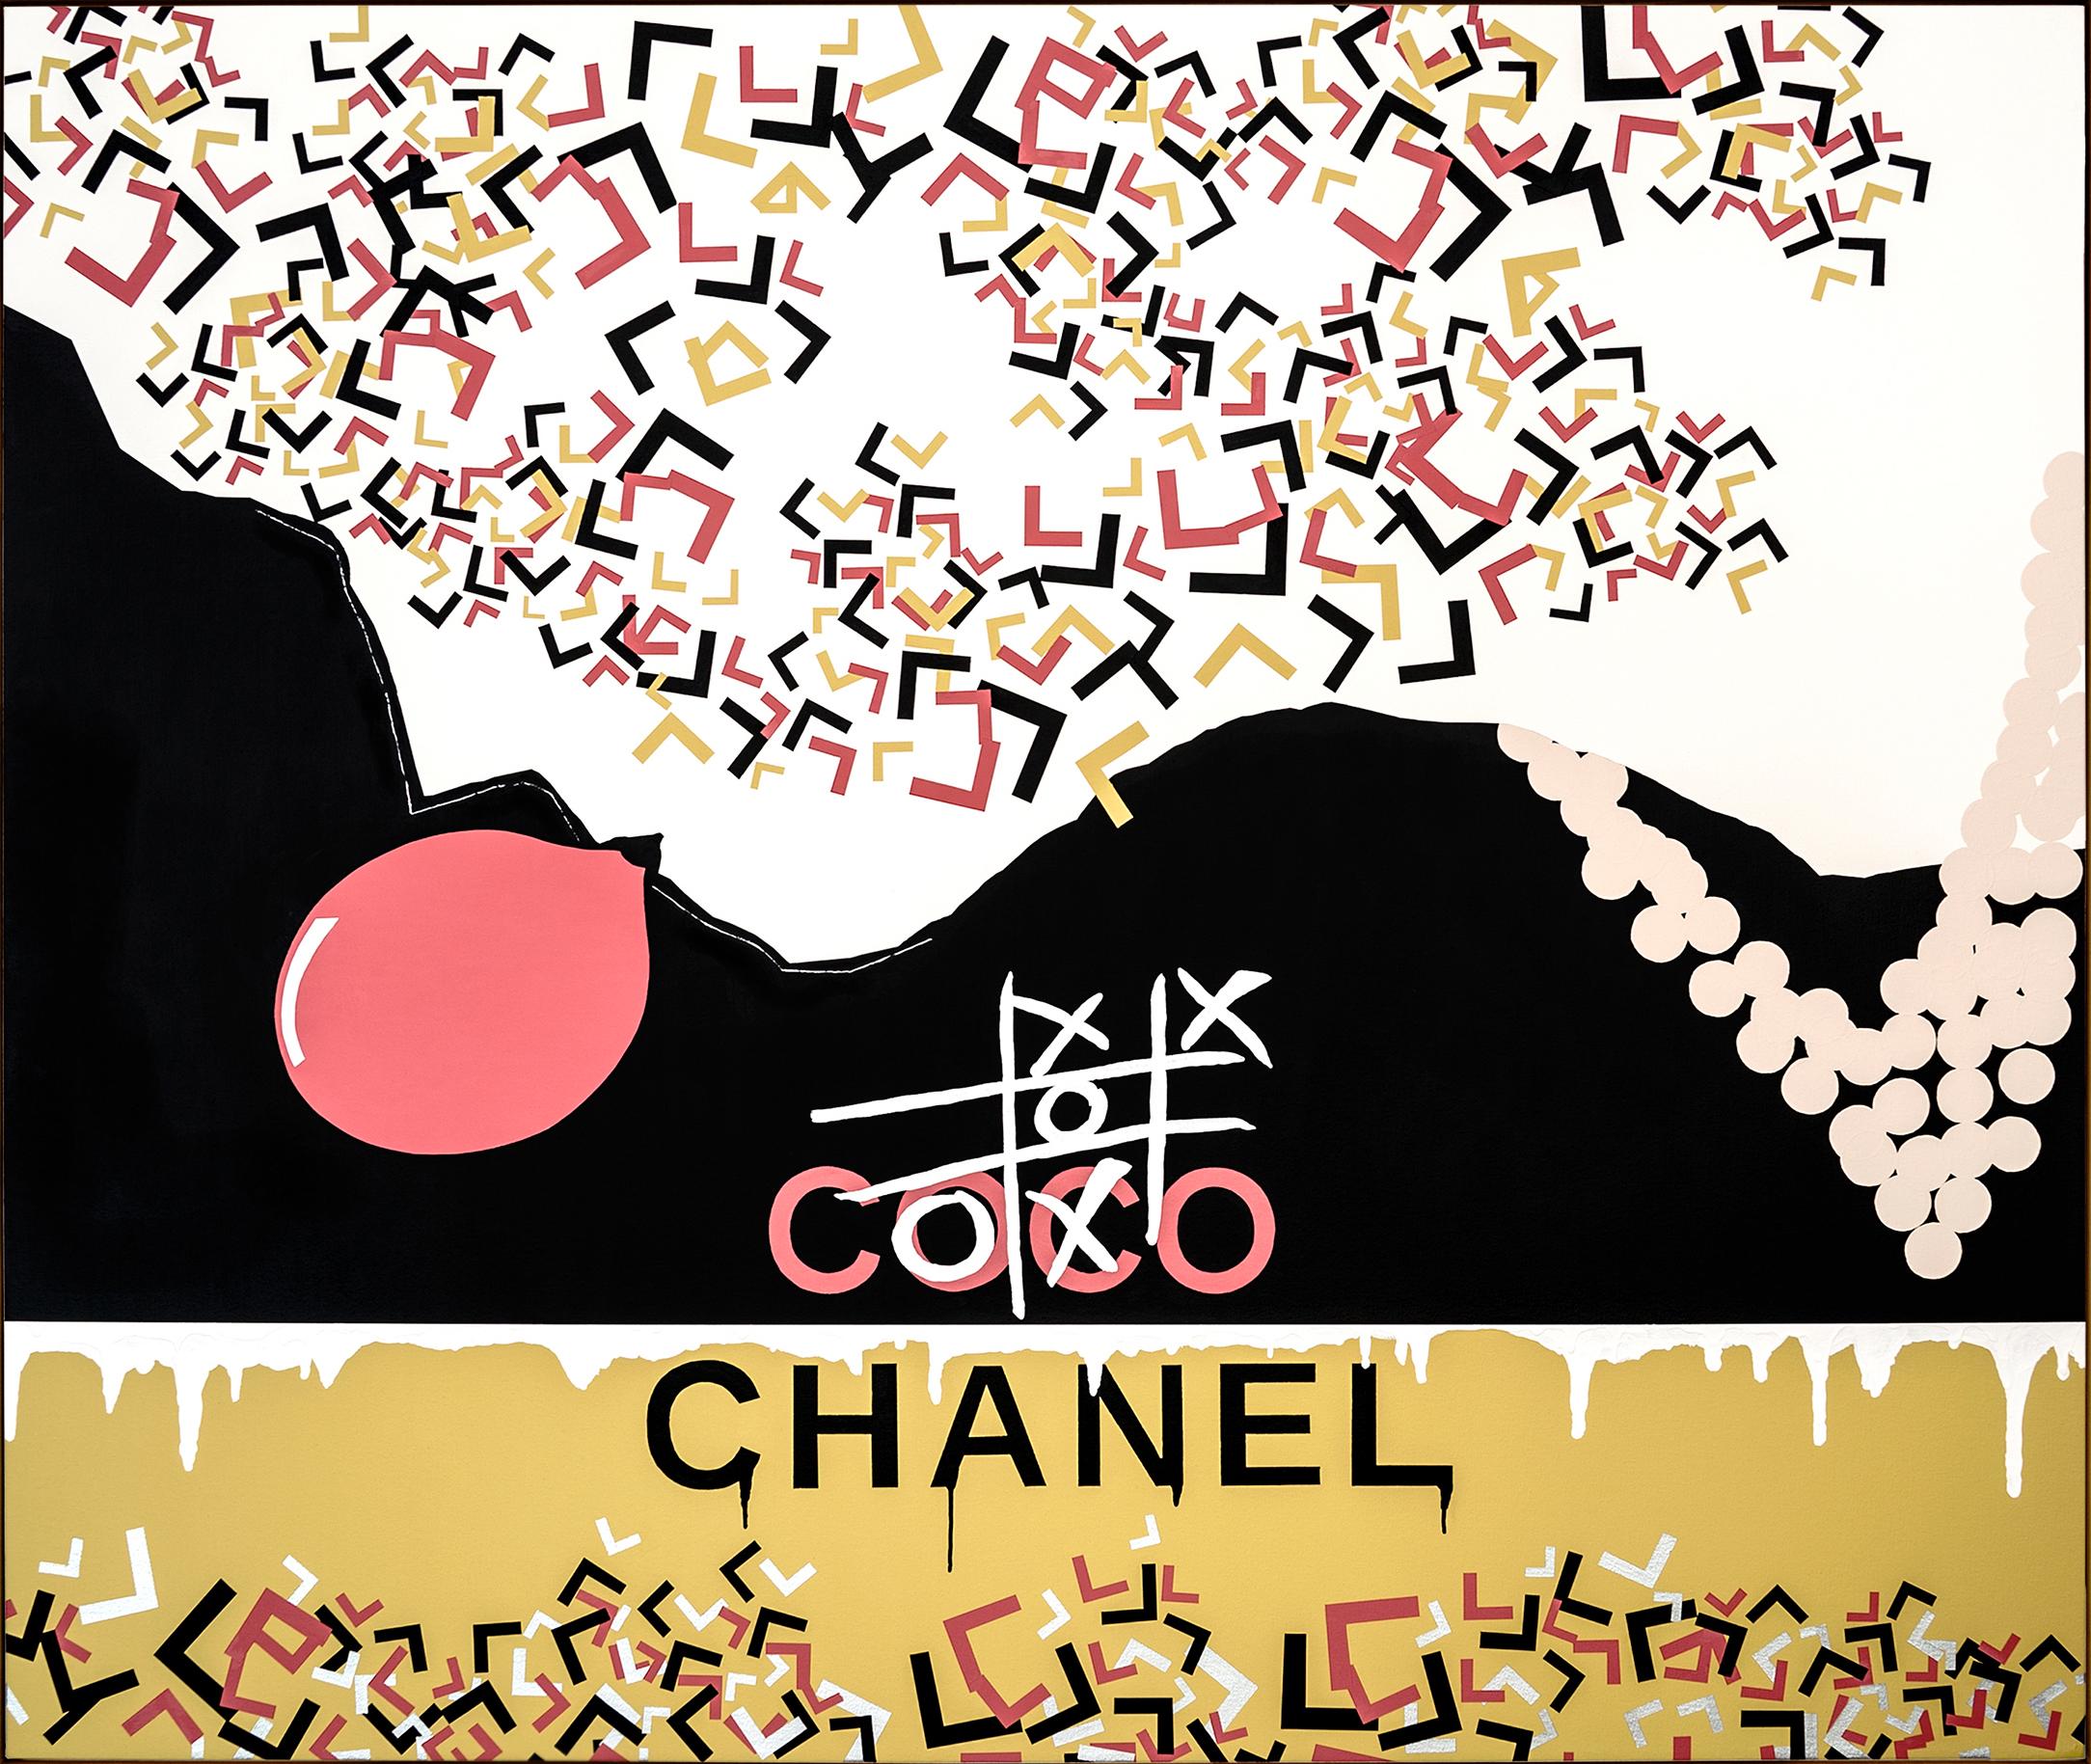 "CHANEL" by Ty Joseph 
From 7 L's series 
2017 
acrylic on canvas
52" x 62"
Comes with a beige floater frame 

* * * The meaning of L series * * *
Although influenced by Pop Art, with its bold, eye-catching images and impersonal approach, at the